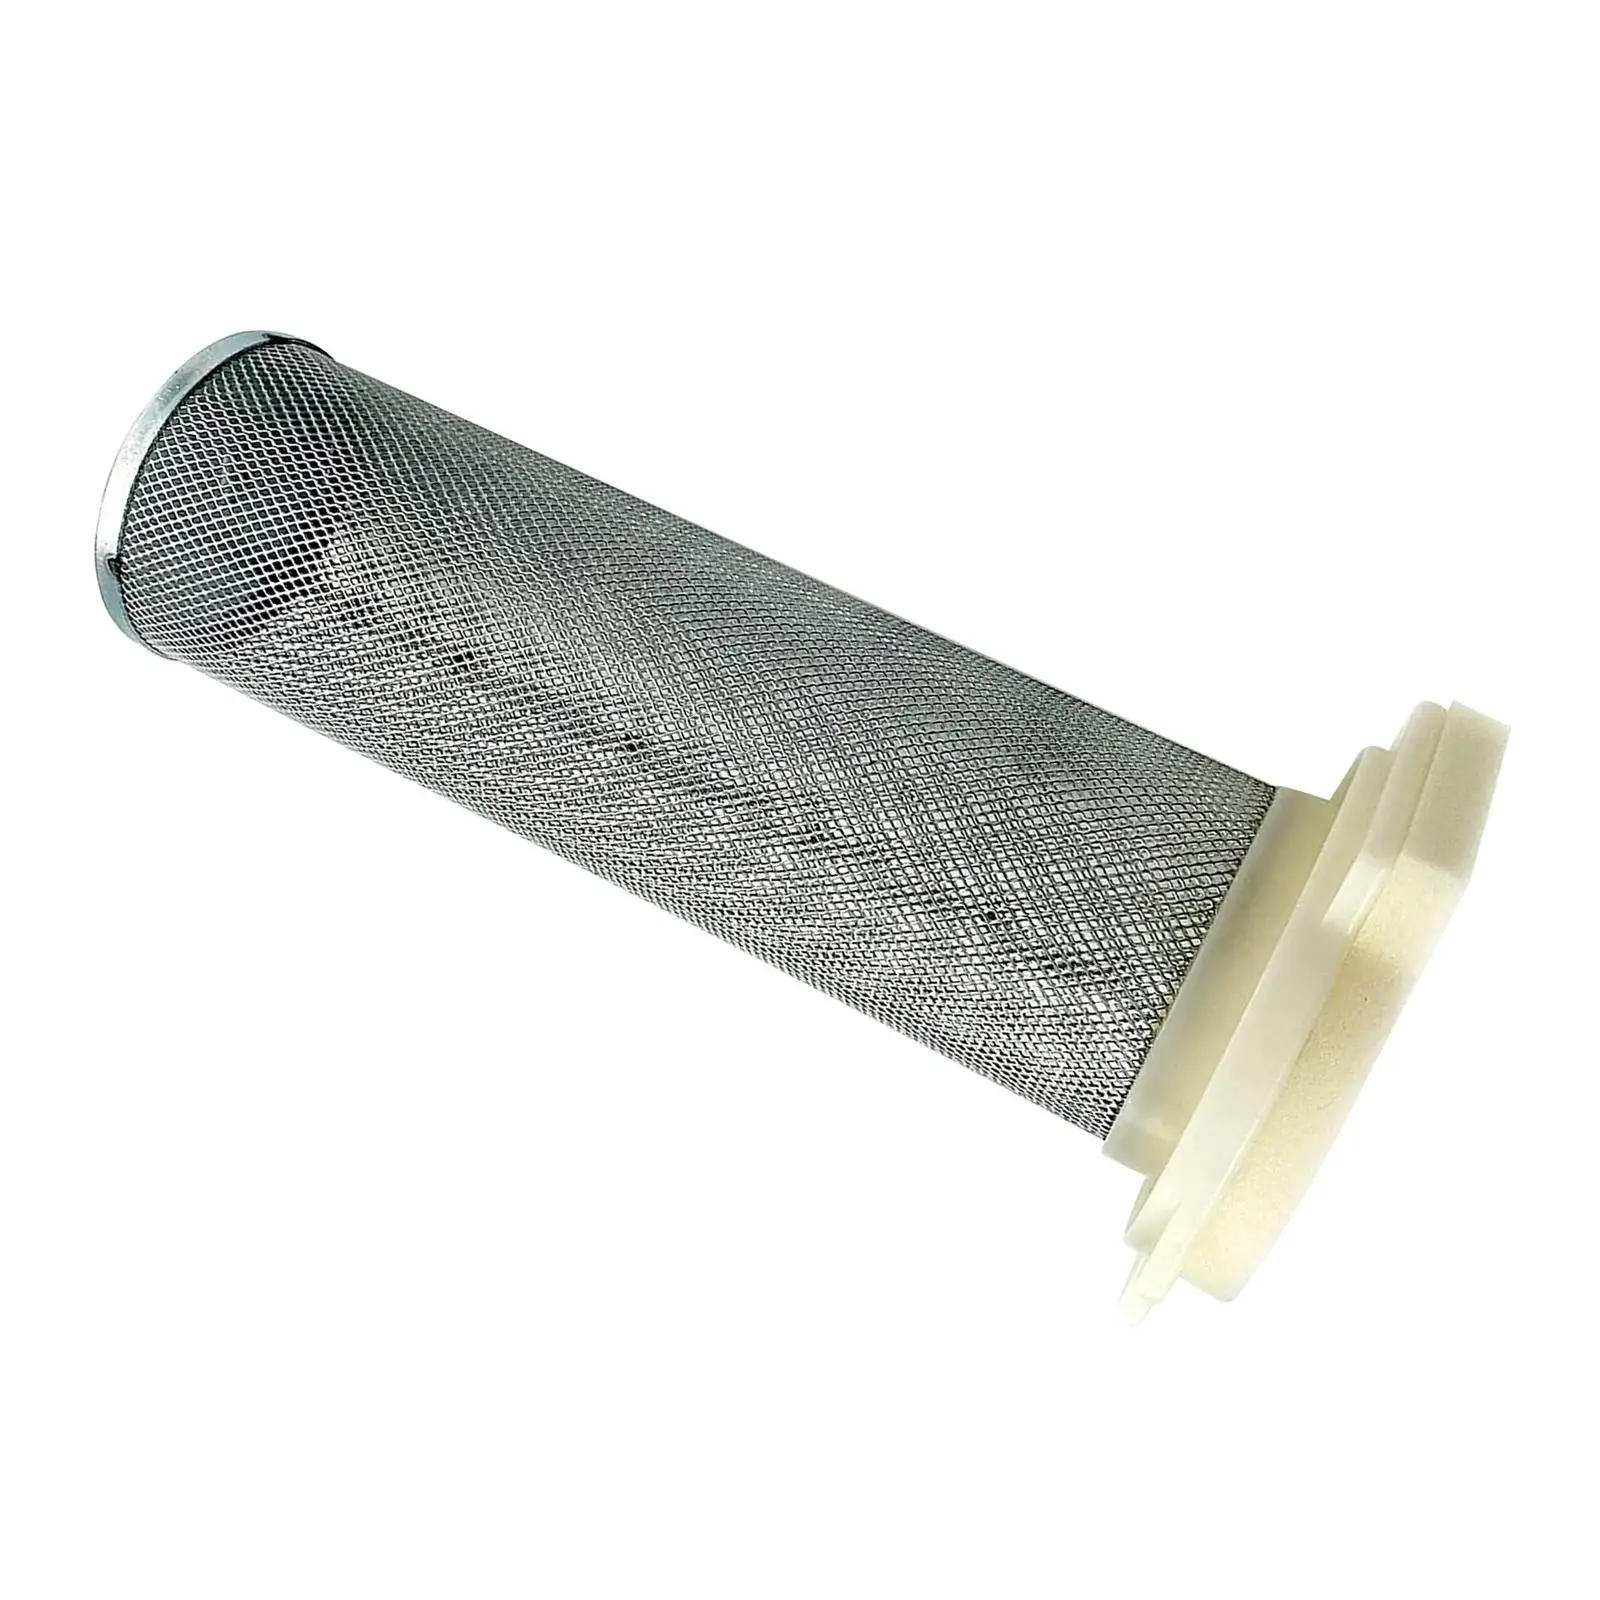 Air Filter Cage 1Uy-14458-01-00 for Yamaha Yfm 350 Direct Replaces Accessory